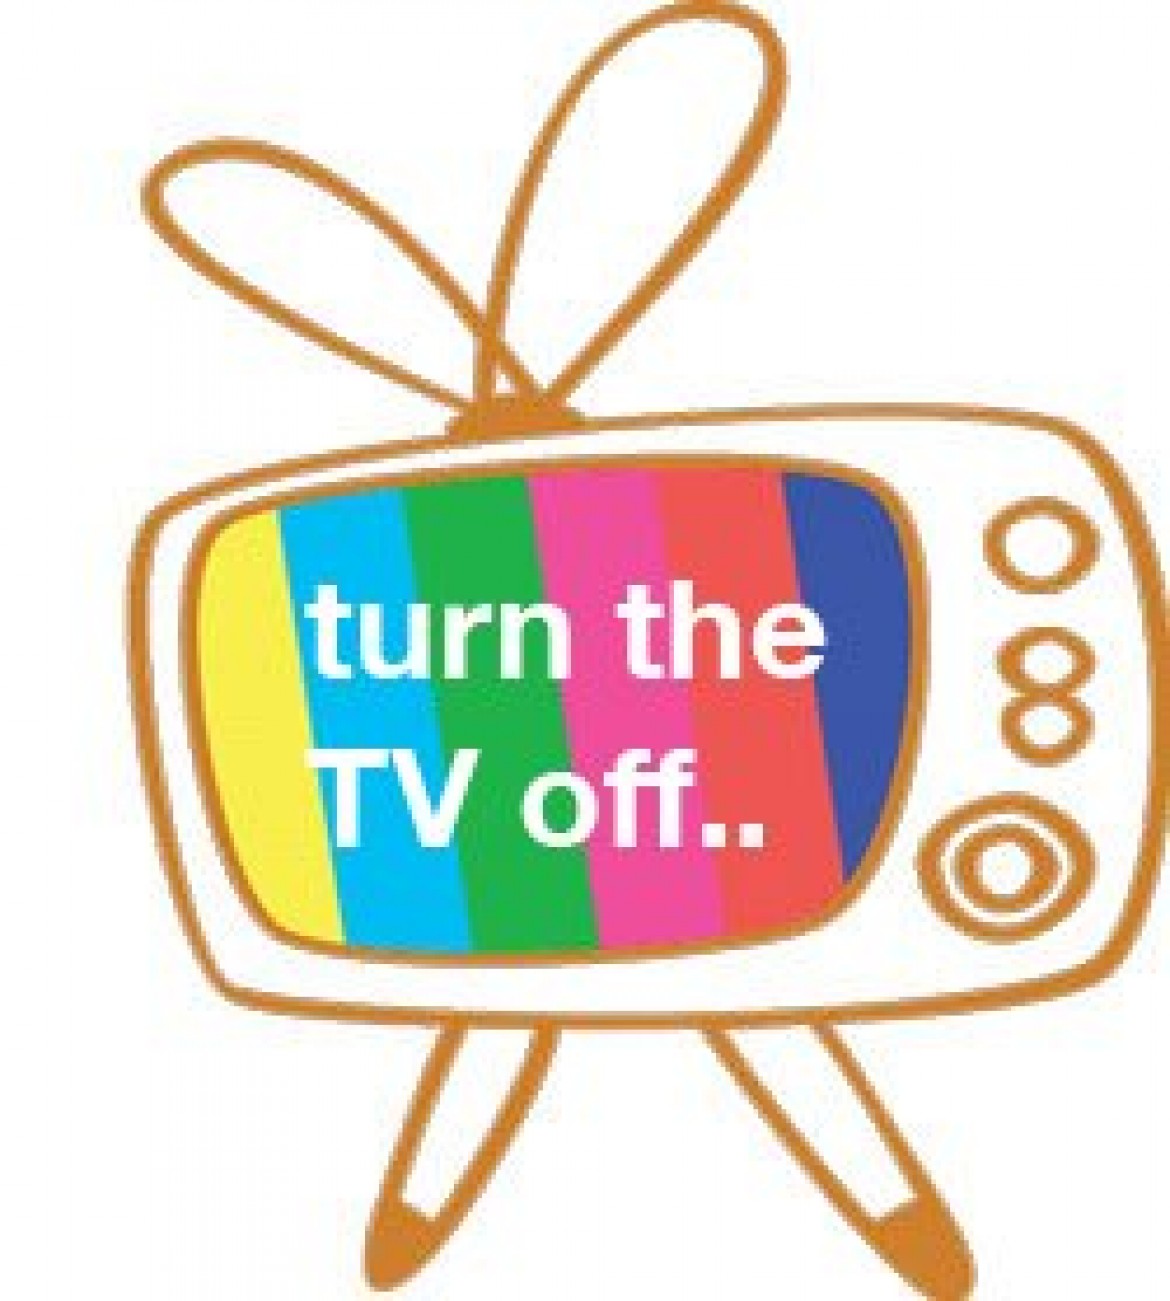 Switch off TV картинки для детей. Turn on the TV. Turn on the TV for Kids. Turn on TV Clipart.